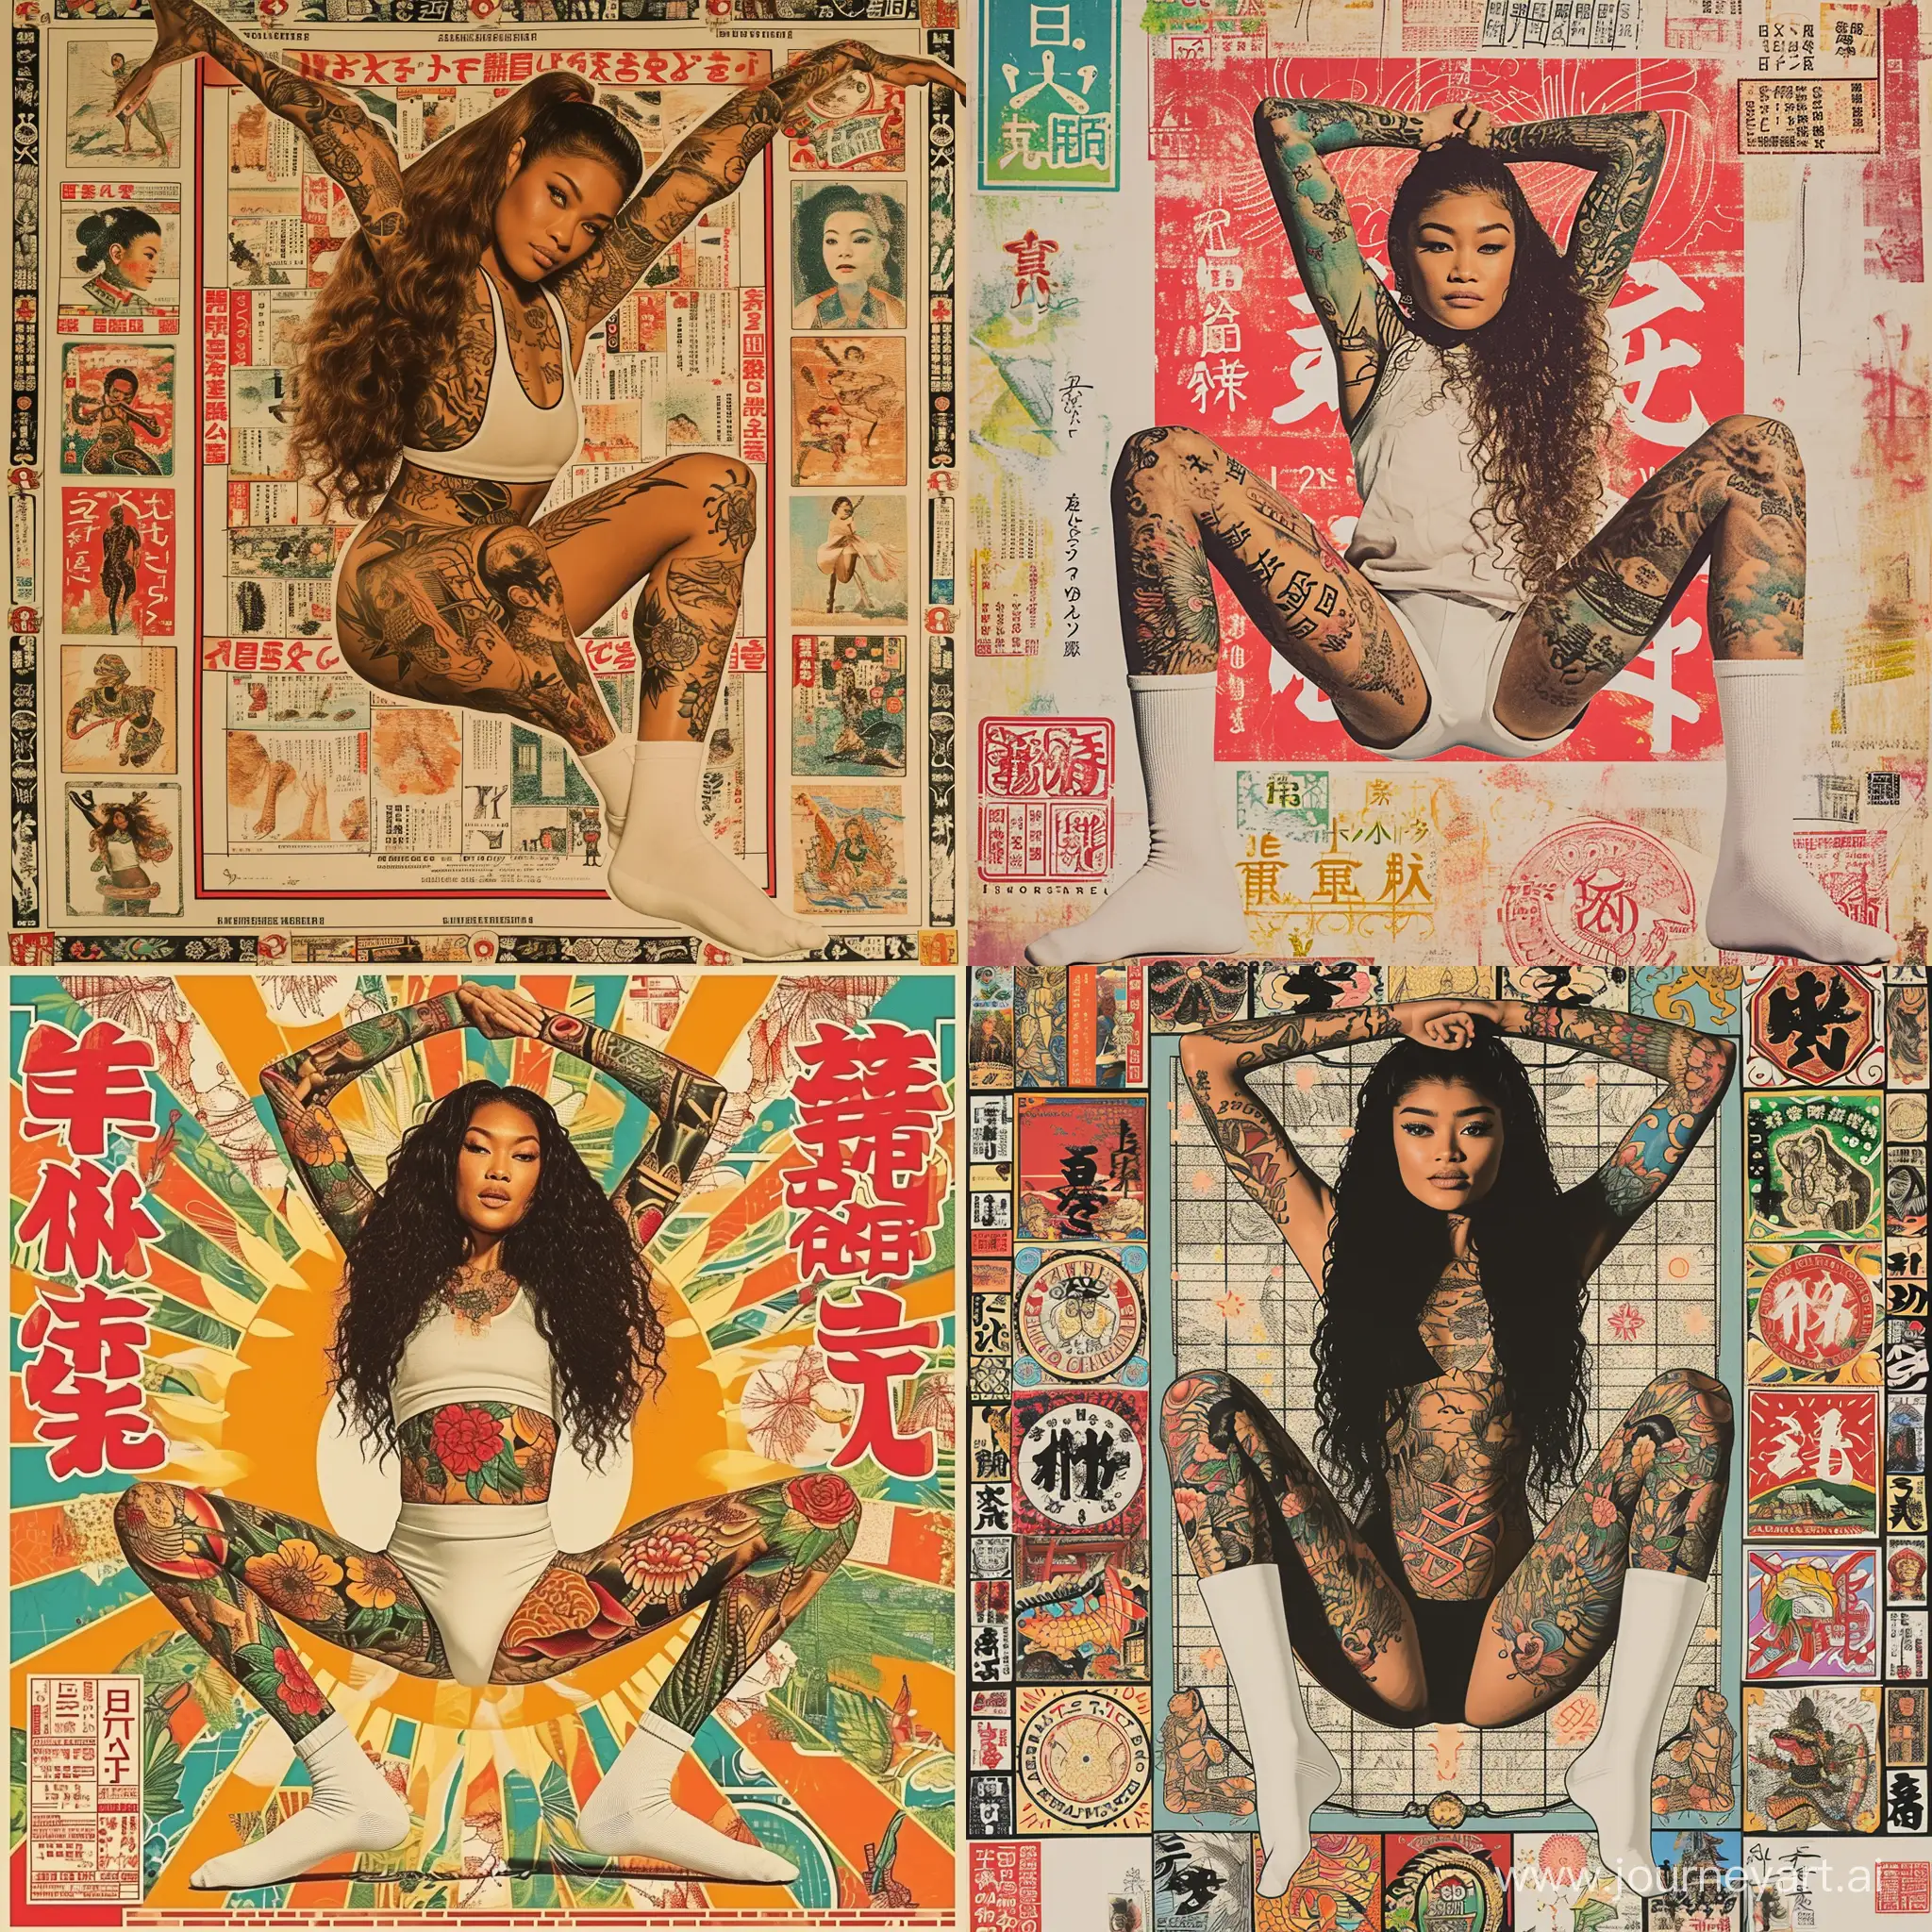 Colorful Japanese retro poster, Zendaya is stretching body, print, extraordinary expression, proud, wearing white socks on feet, covered with traditional Japanese tattoo designs, thin tattoos, strong sense of contrast, mix of avant-garde art Body